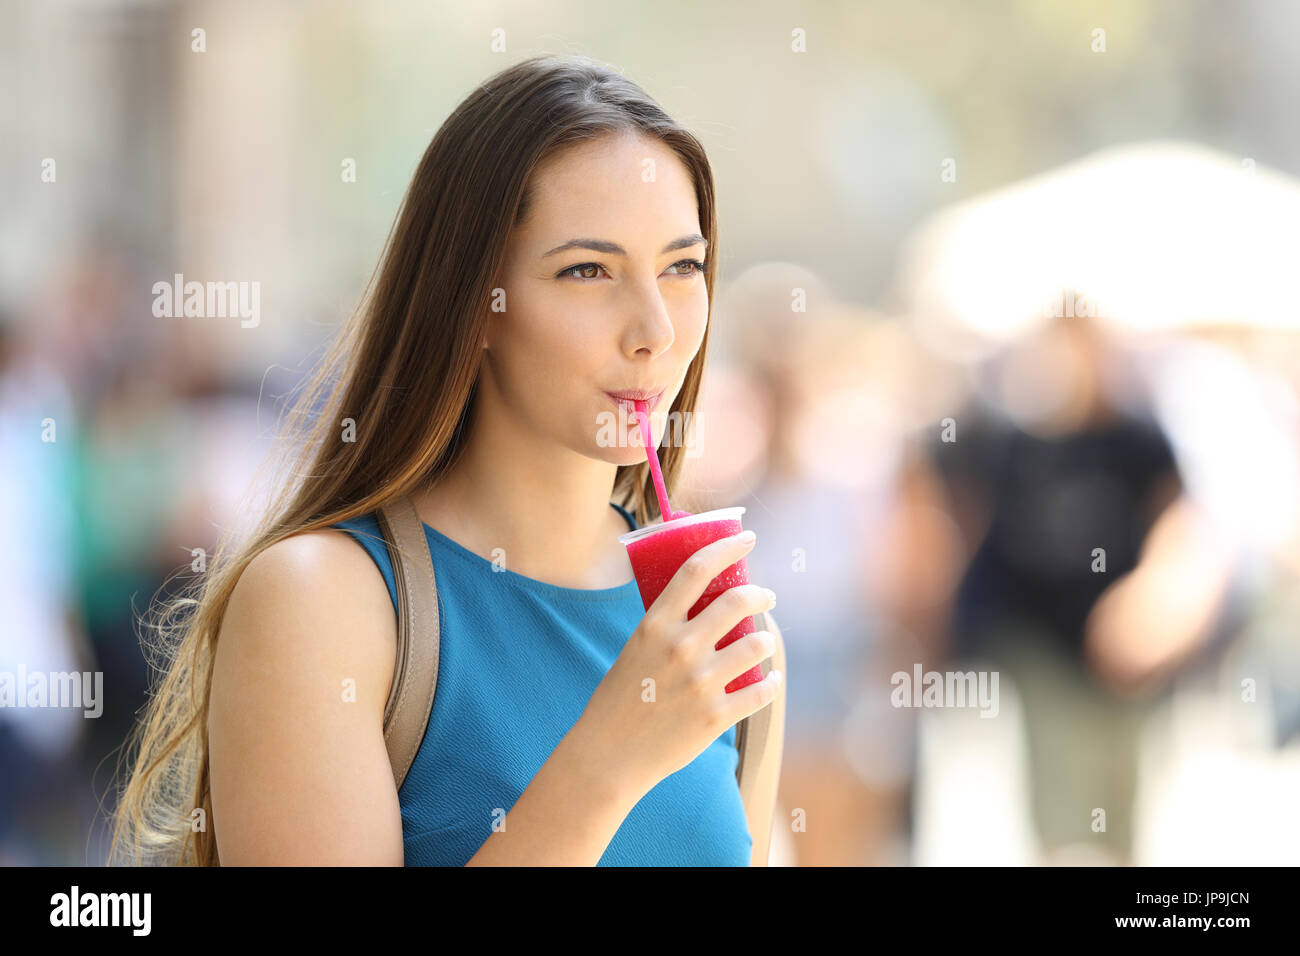 Single girl walking and sipping a slush in the street in summer Stock Photo